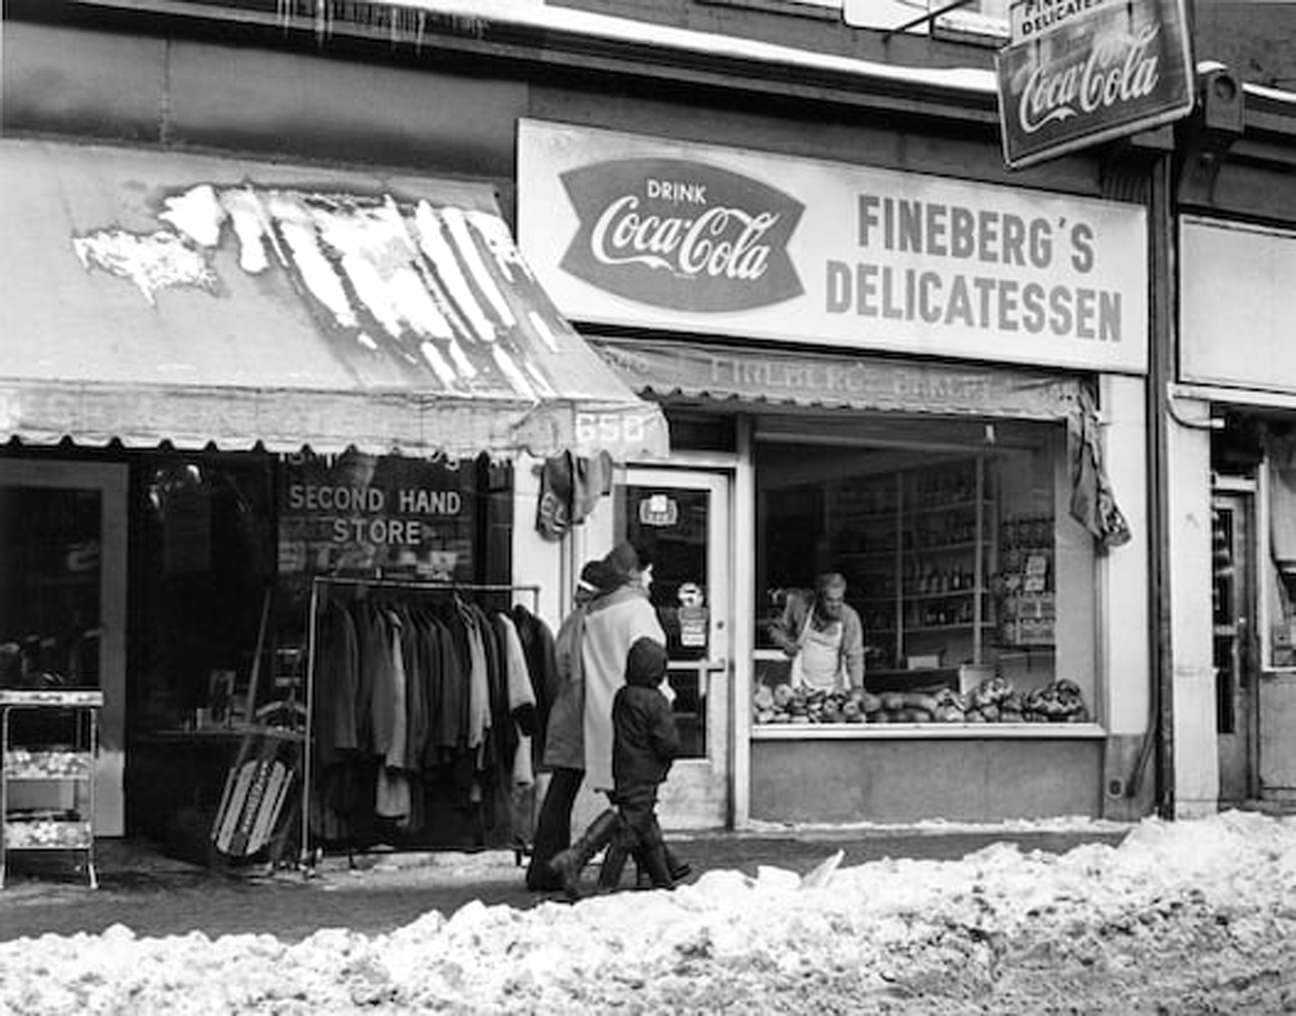 Fineberg's Delicatessen. My maternal grandparent's deli at 648 Queen St. West. (Their family lived in the apartment on the second floor.), 1960s